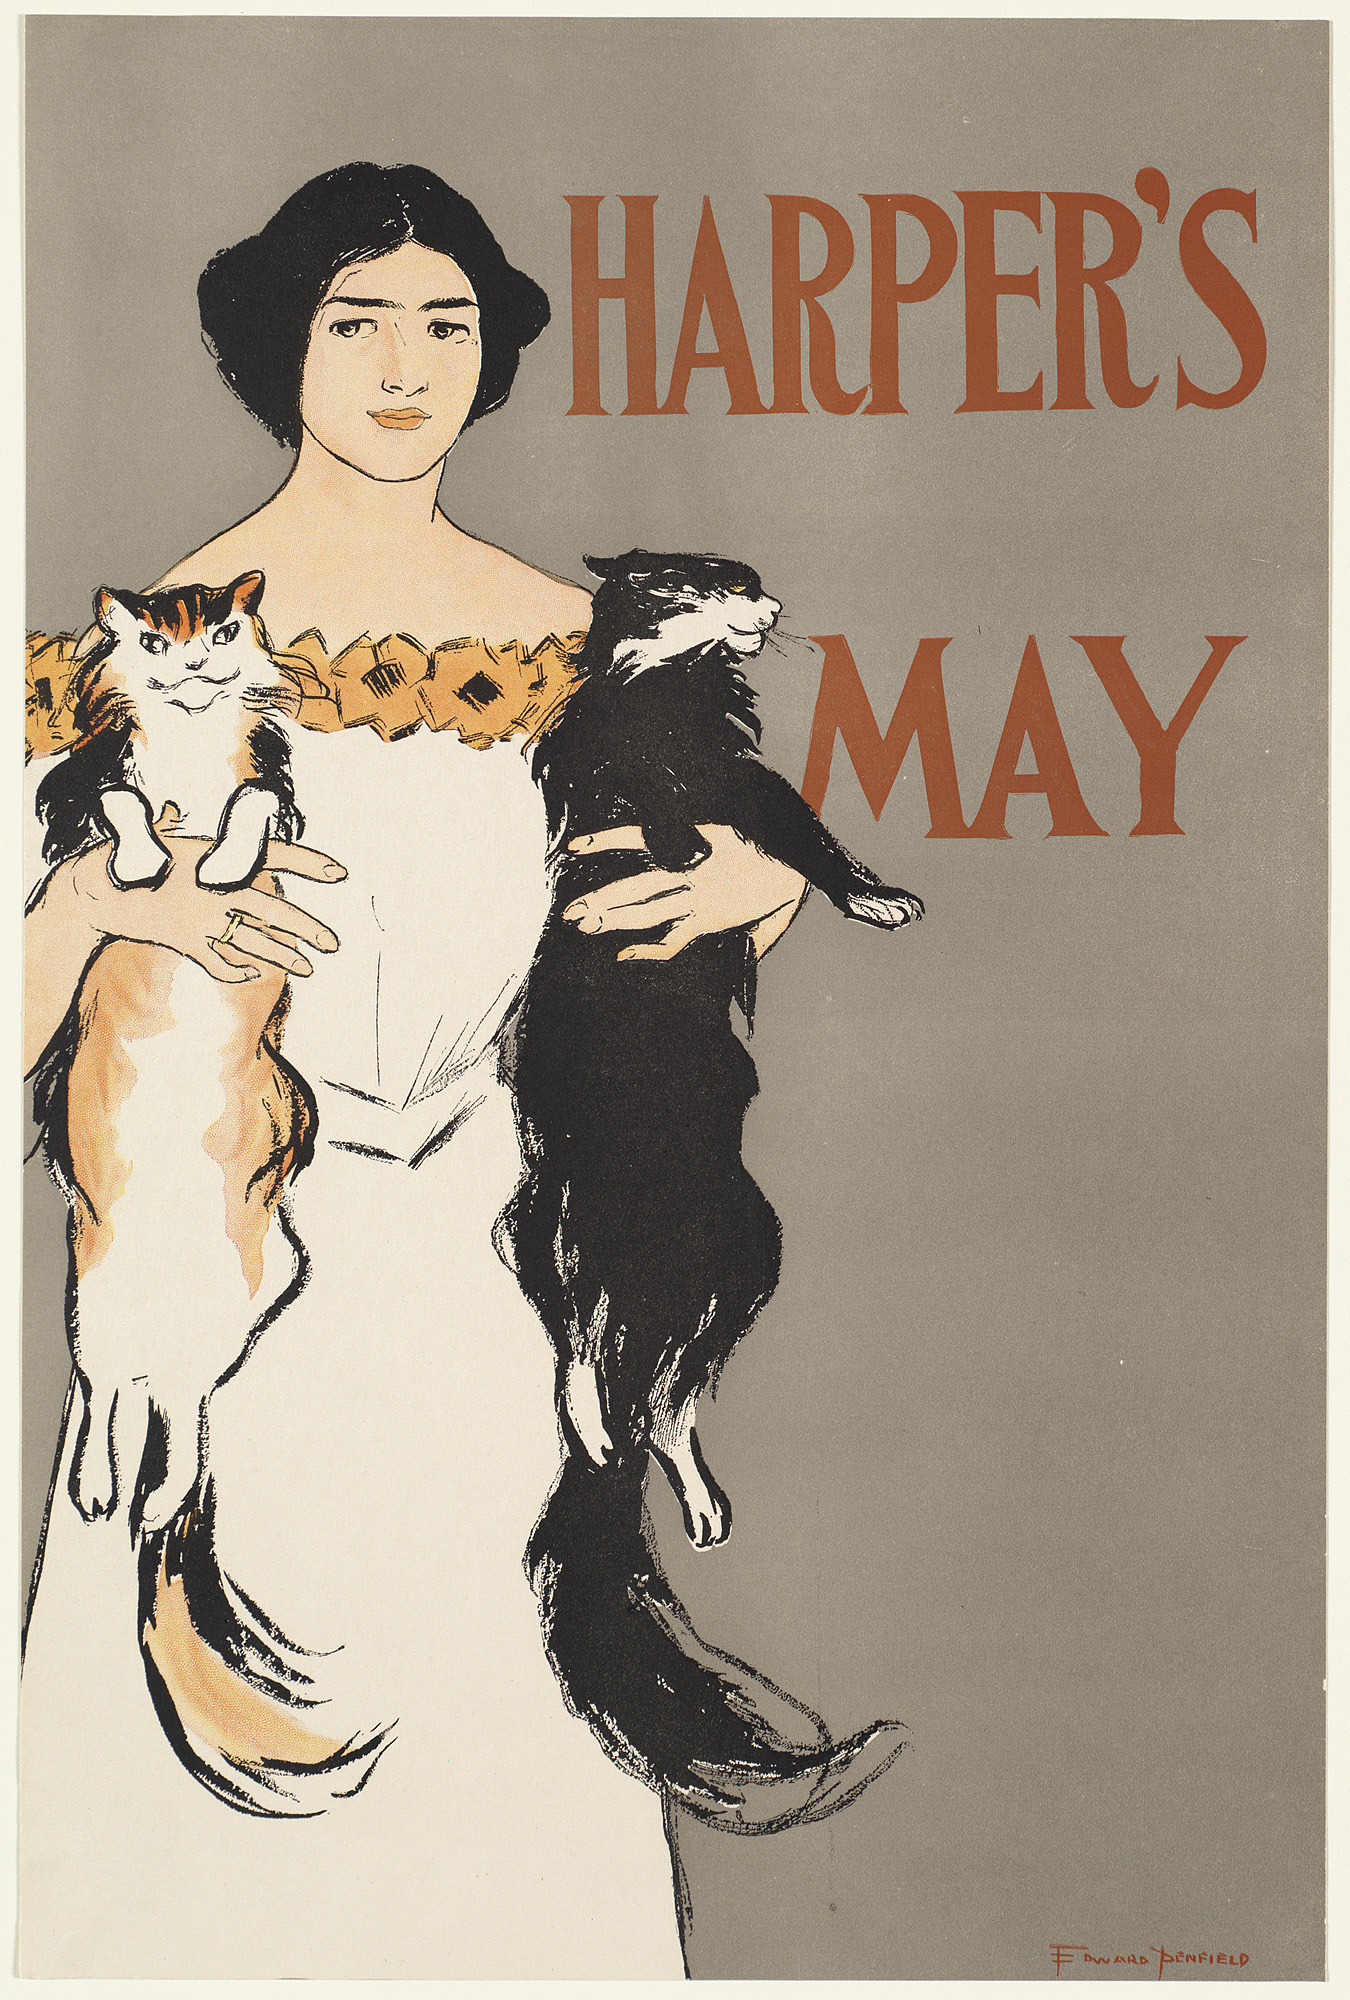 a poster for harper's day showing a woman holding a cat and a dog